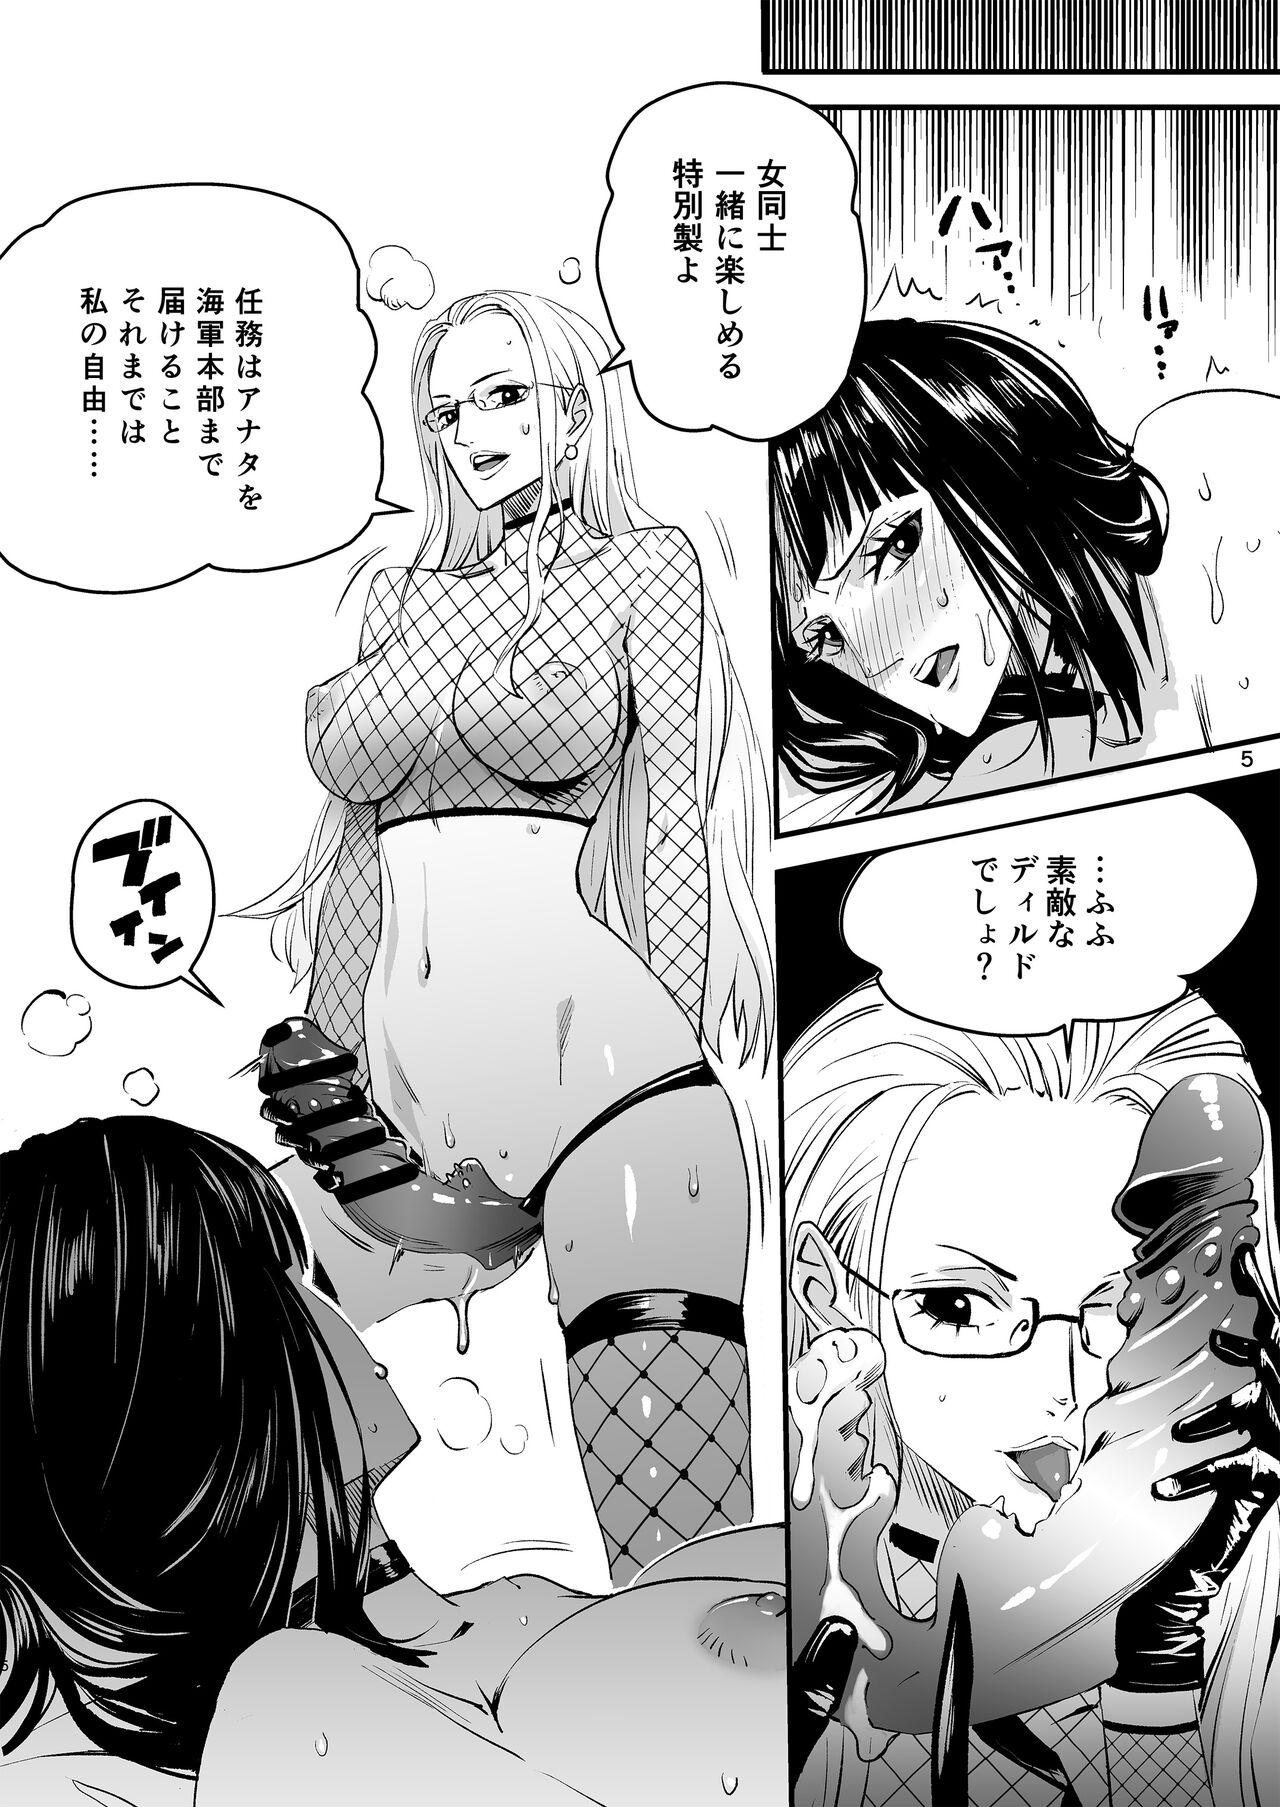 Massive 泡の華 - One piece Boy - Page 5